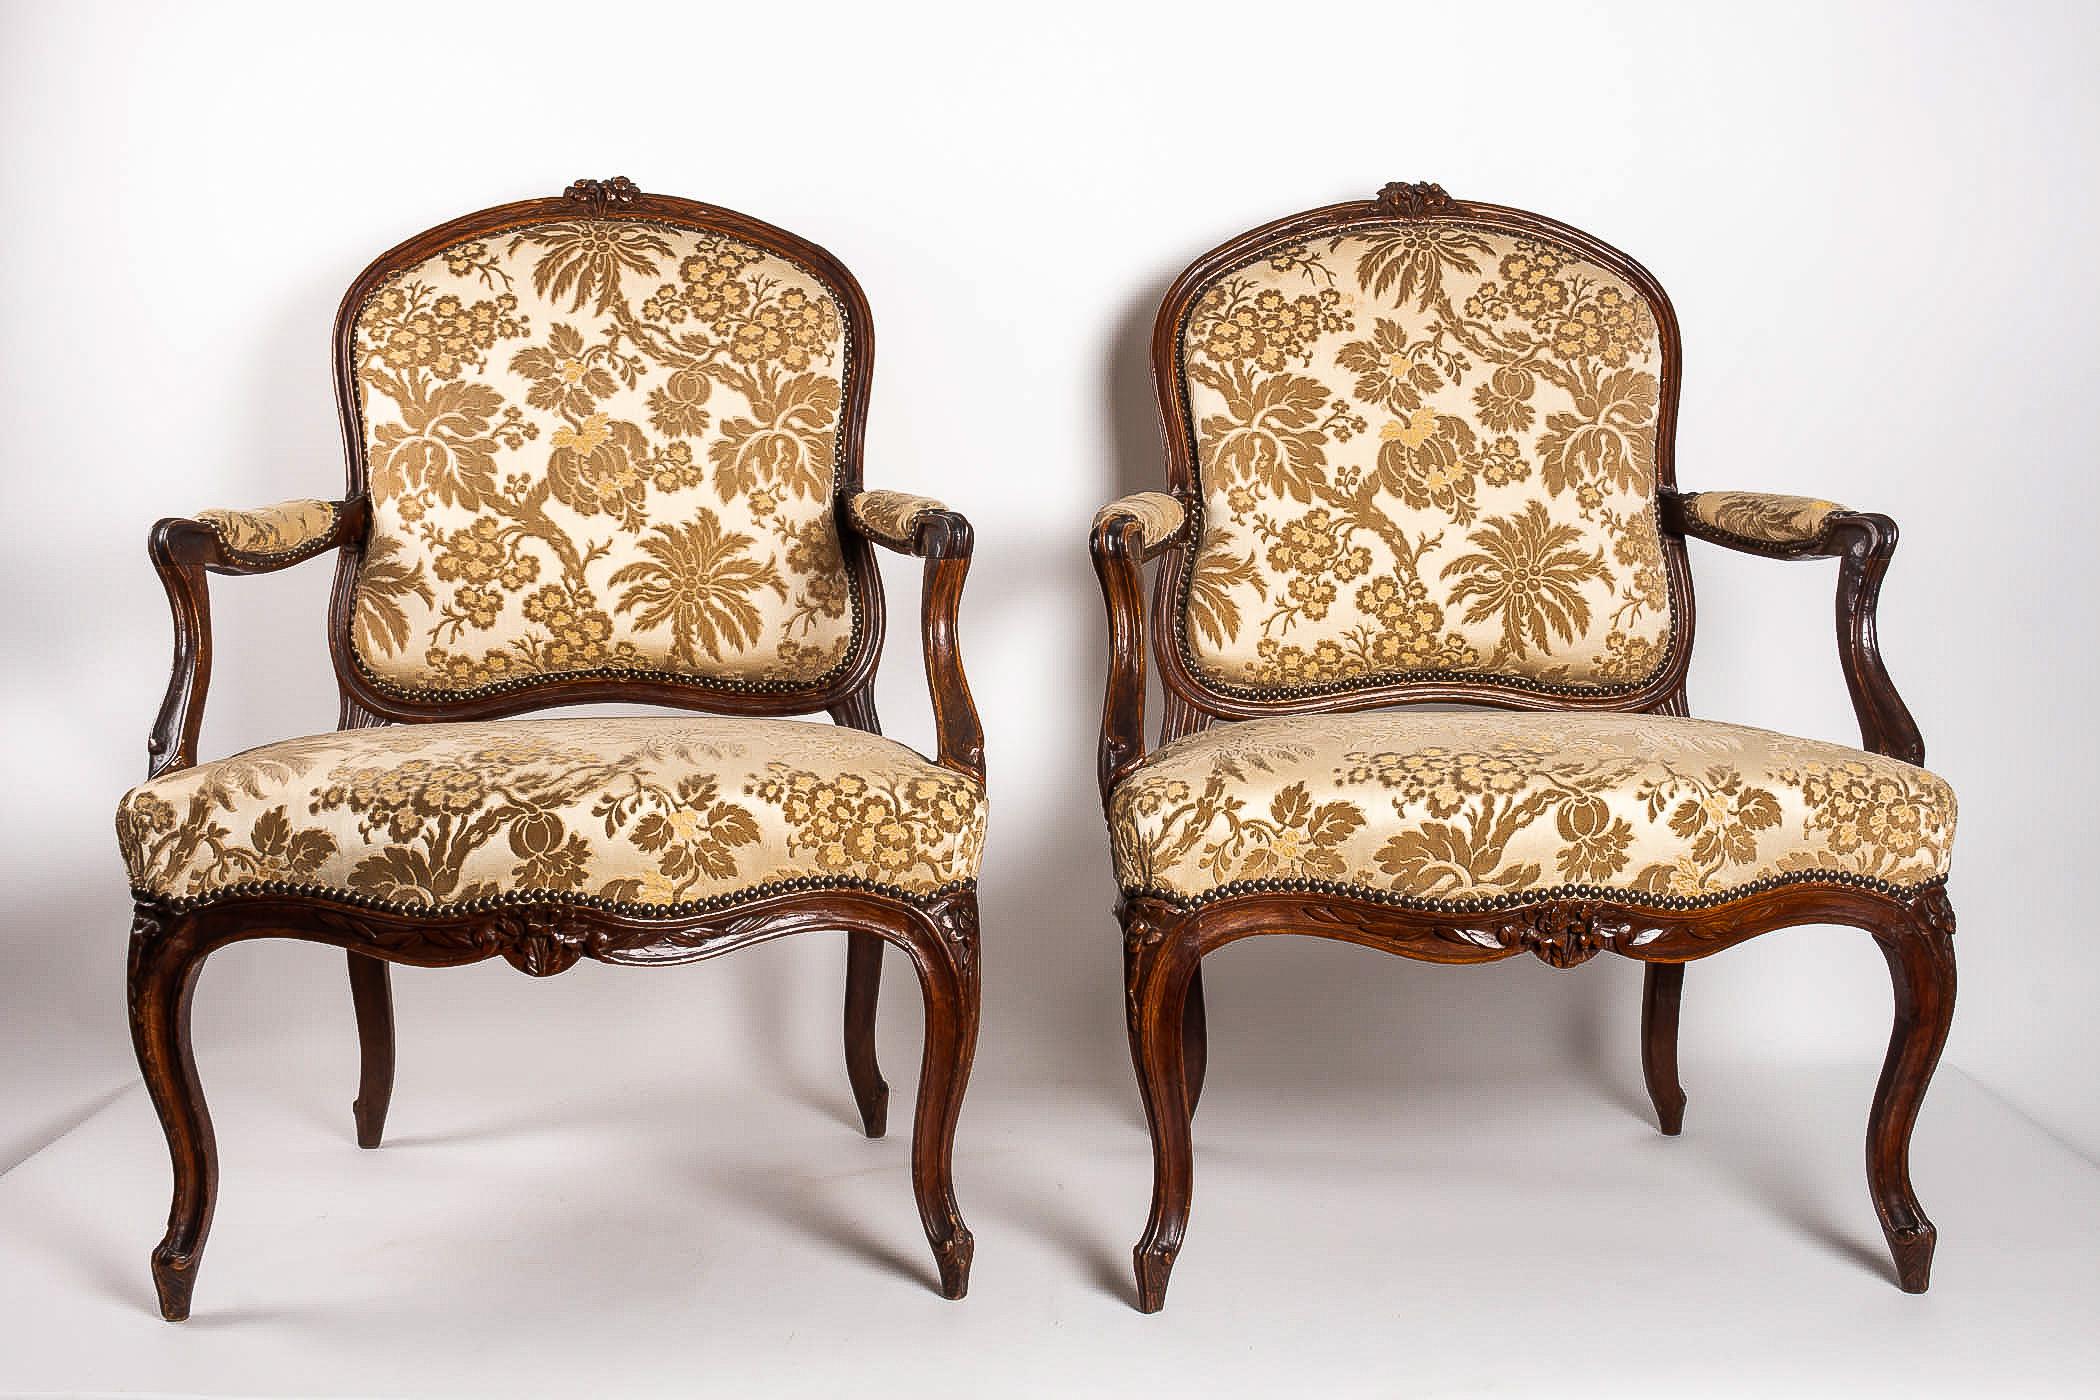 Stamped by Martin Jardin pair of large Louis XV Walnut armchairs, circa 1760

Elegant and decorative pair of large walnut carved armchairs, stamped by Martin Jardin.

French work, manufactured in the city of Lyon, late Louis XV period, circa